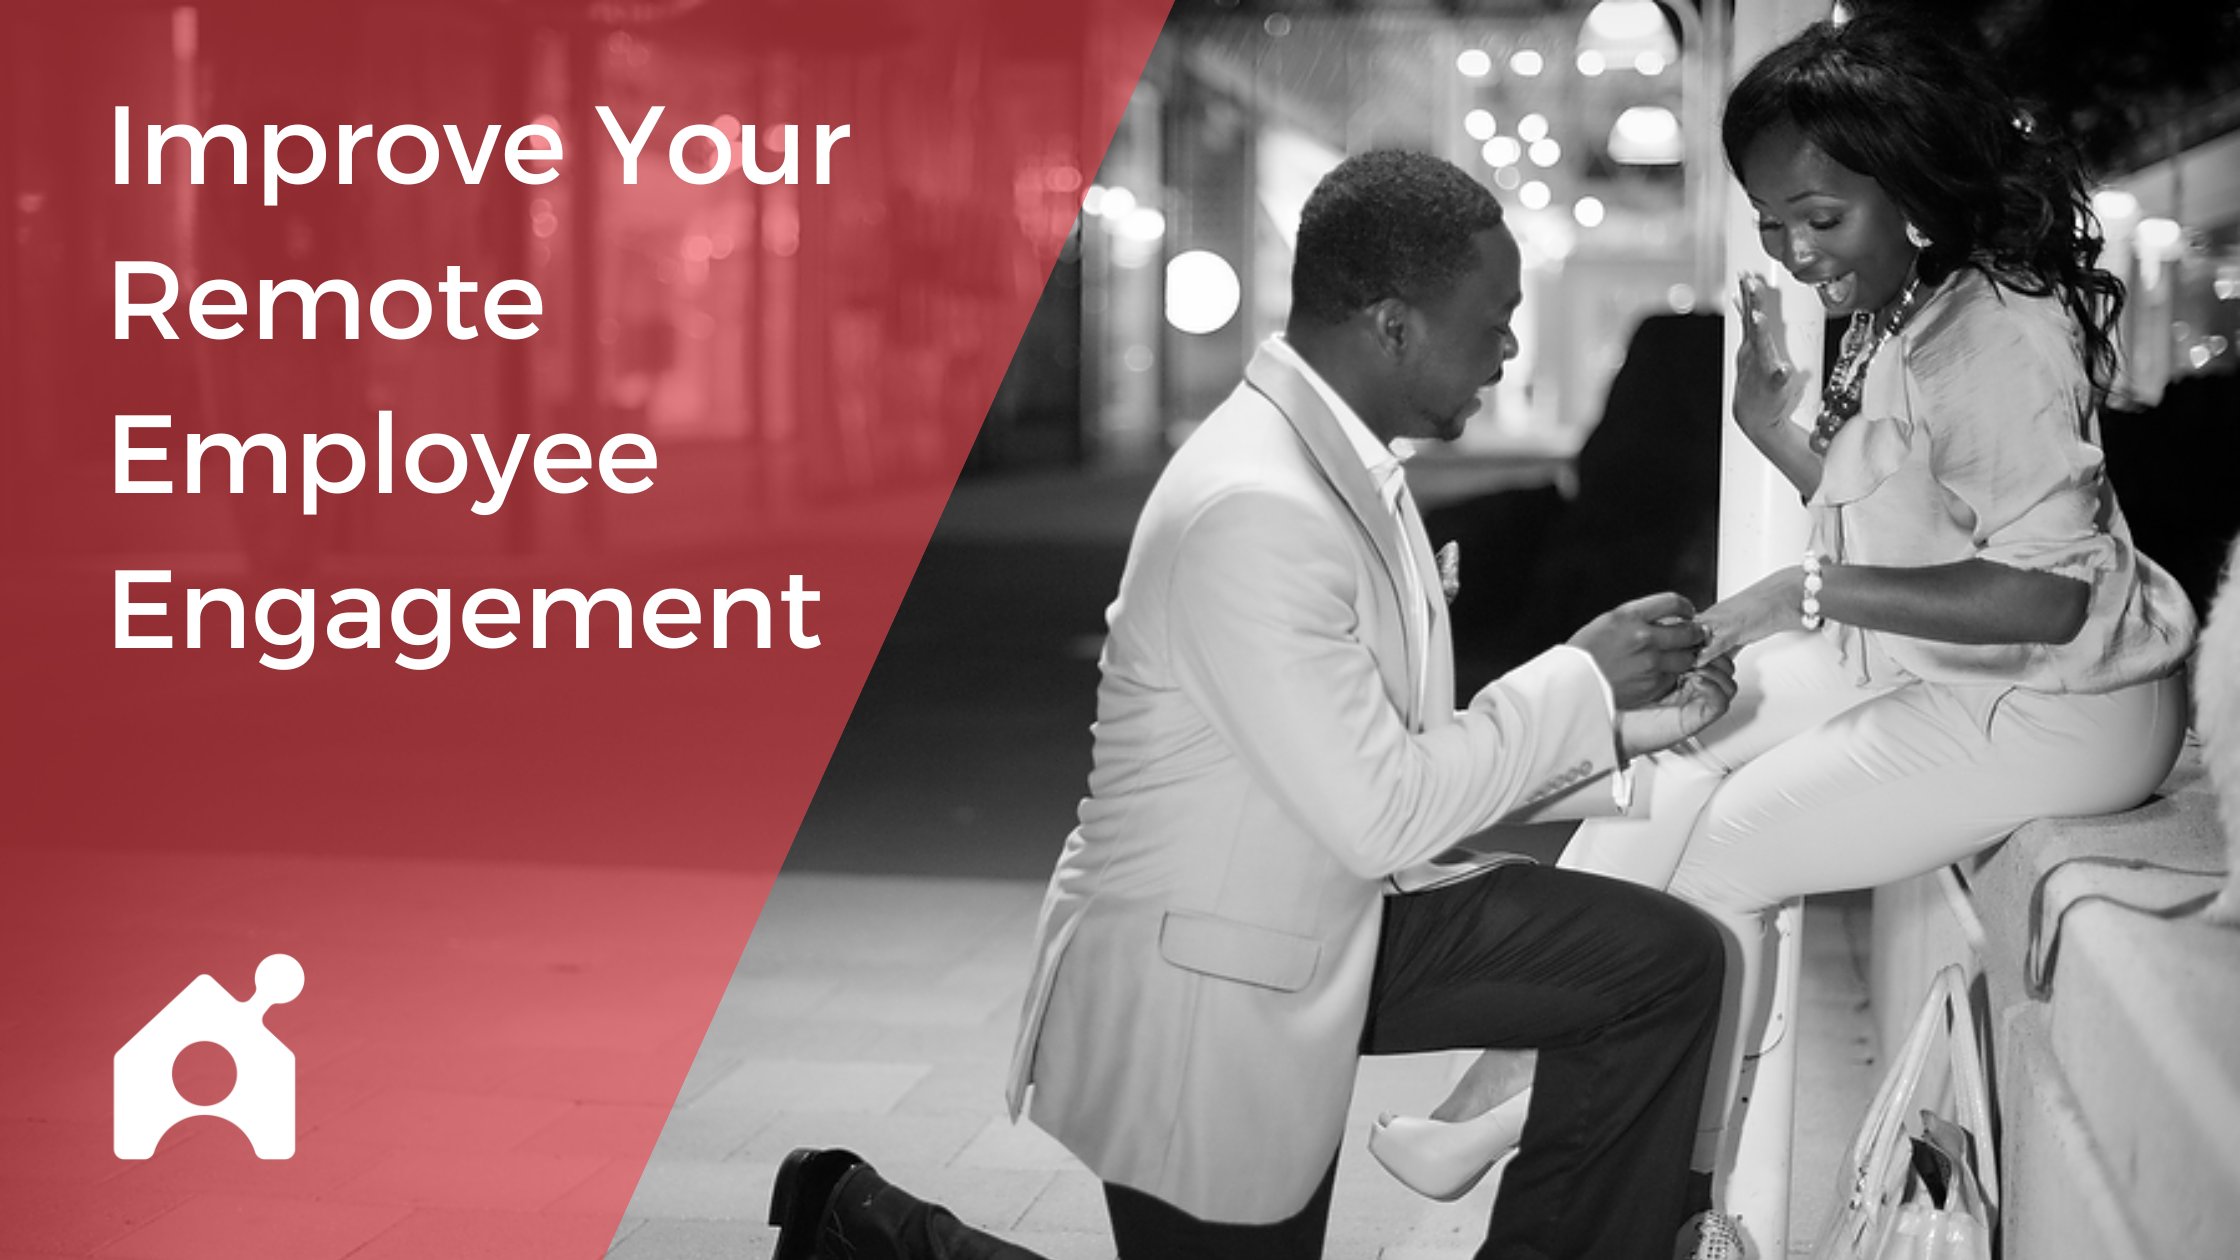 How to improve your remote employee engagement